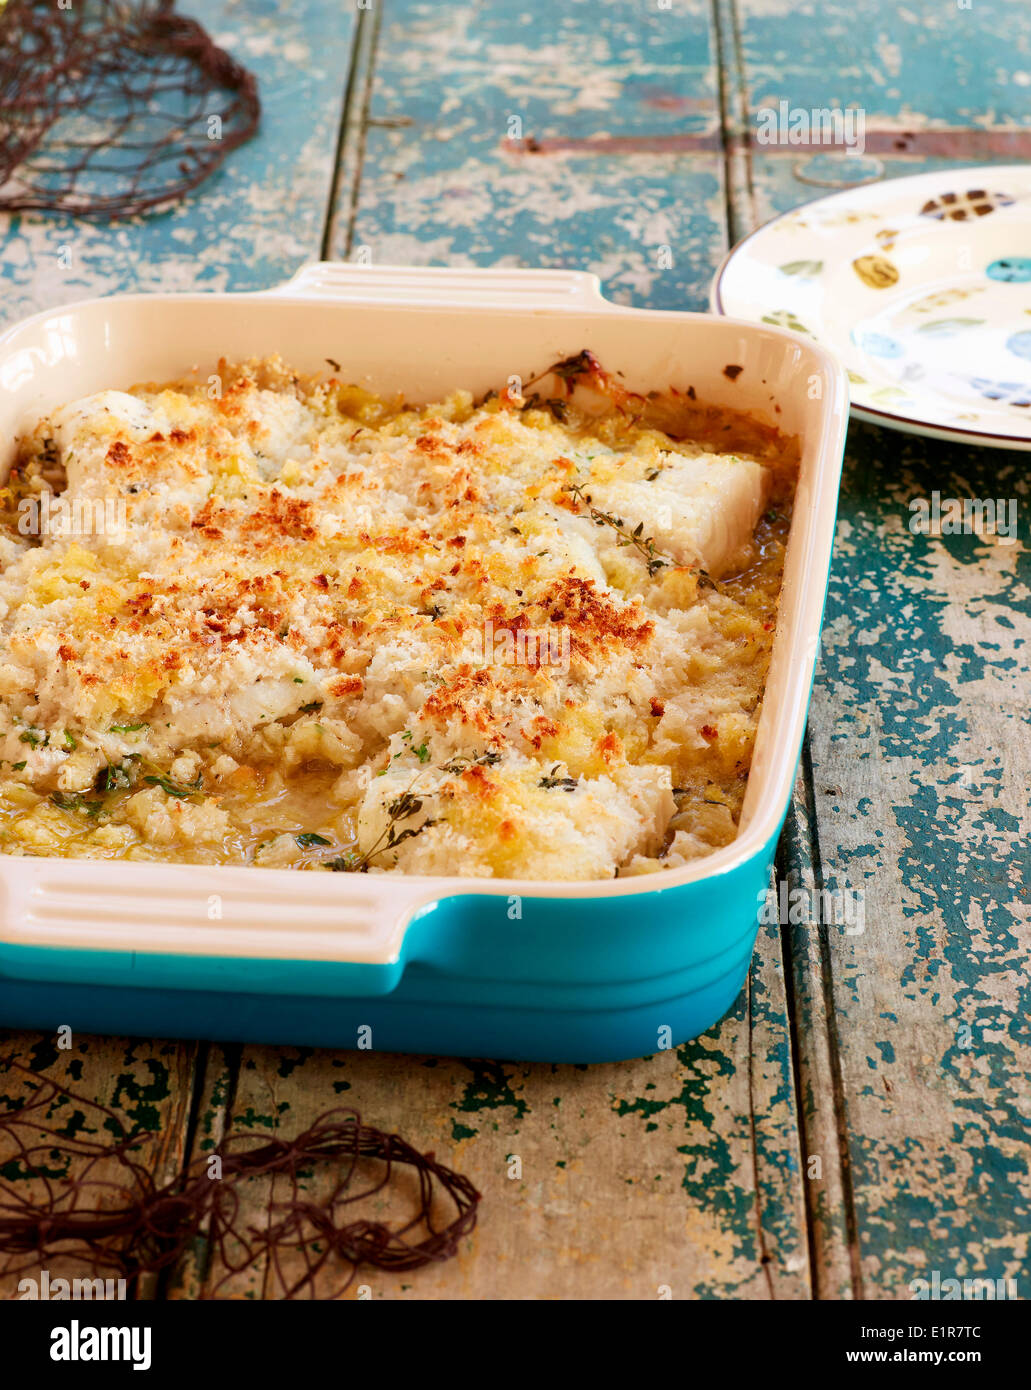 Cod and cider bake Stock Photo